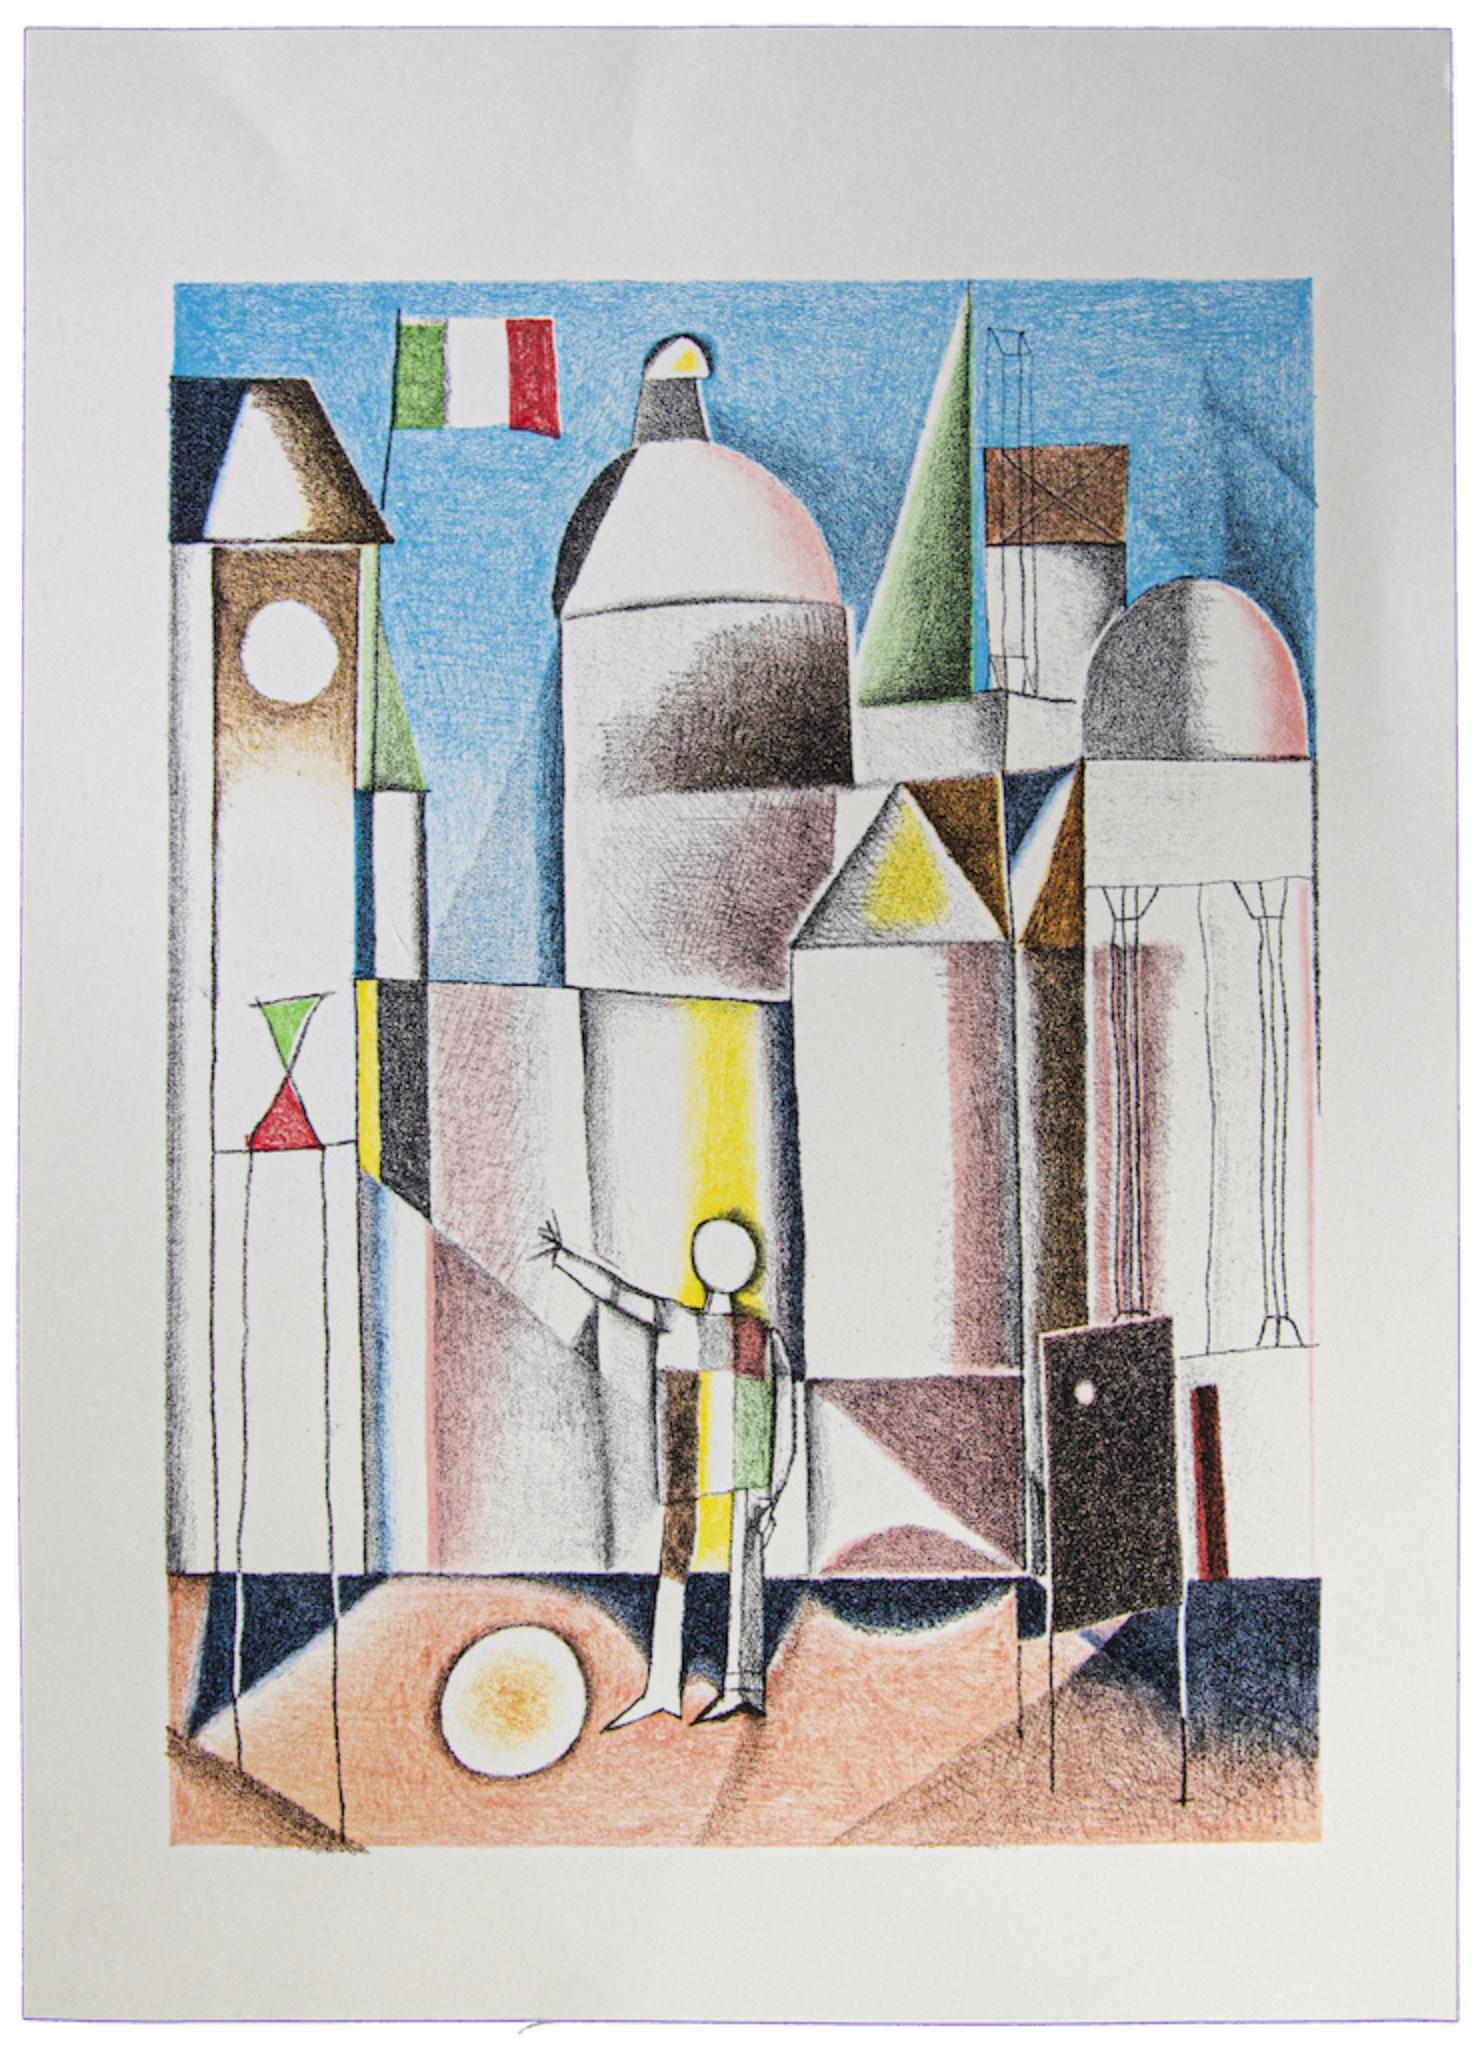 Italian City is an original Vintage Offset Print on ivory-colored paper, realized by Franco Gentilini (Italian Painter, 1909-1981), in 1970s.

The state of preservation of the artwork is excellent.

Franco Gentilini (Italian Painter, 1909-1981):